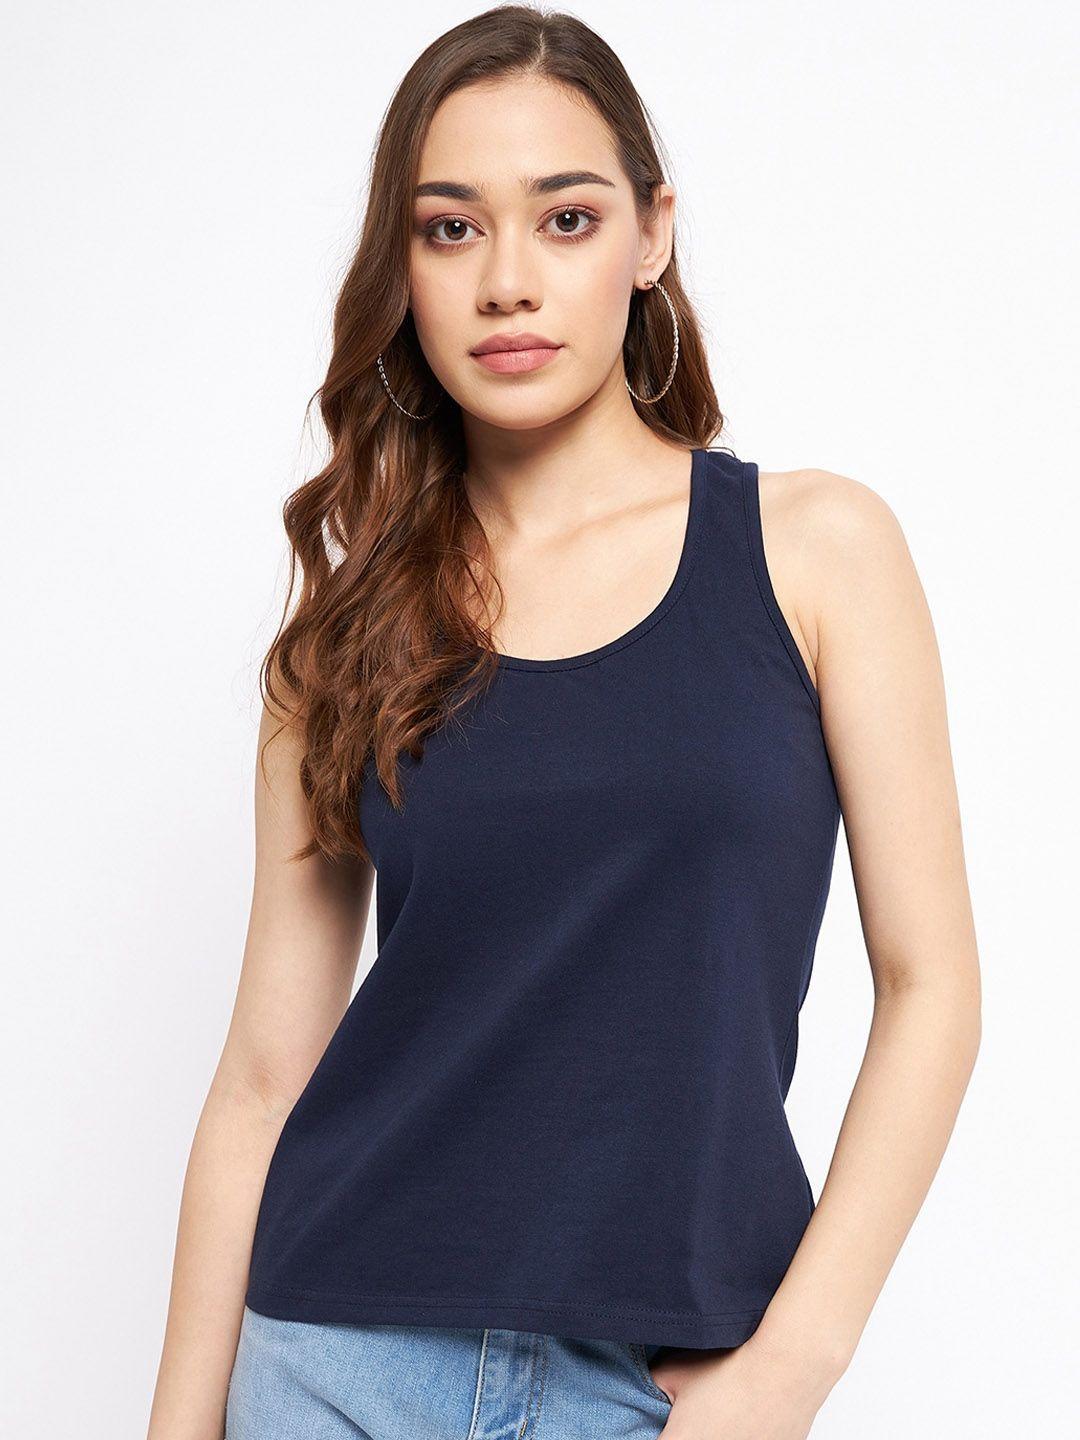 brinns scoop neck non-padded racer back camisoles